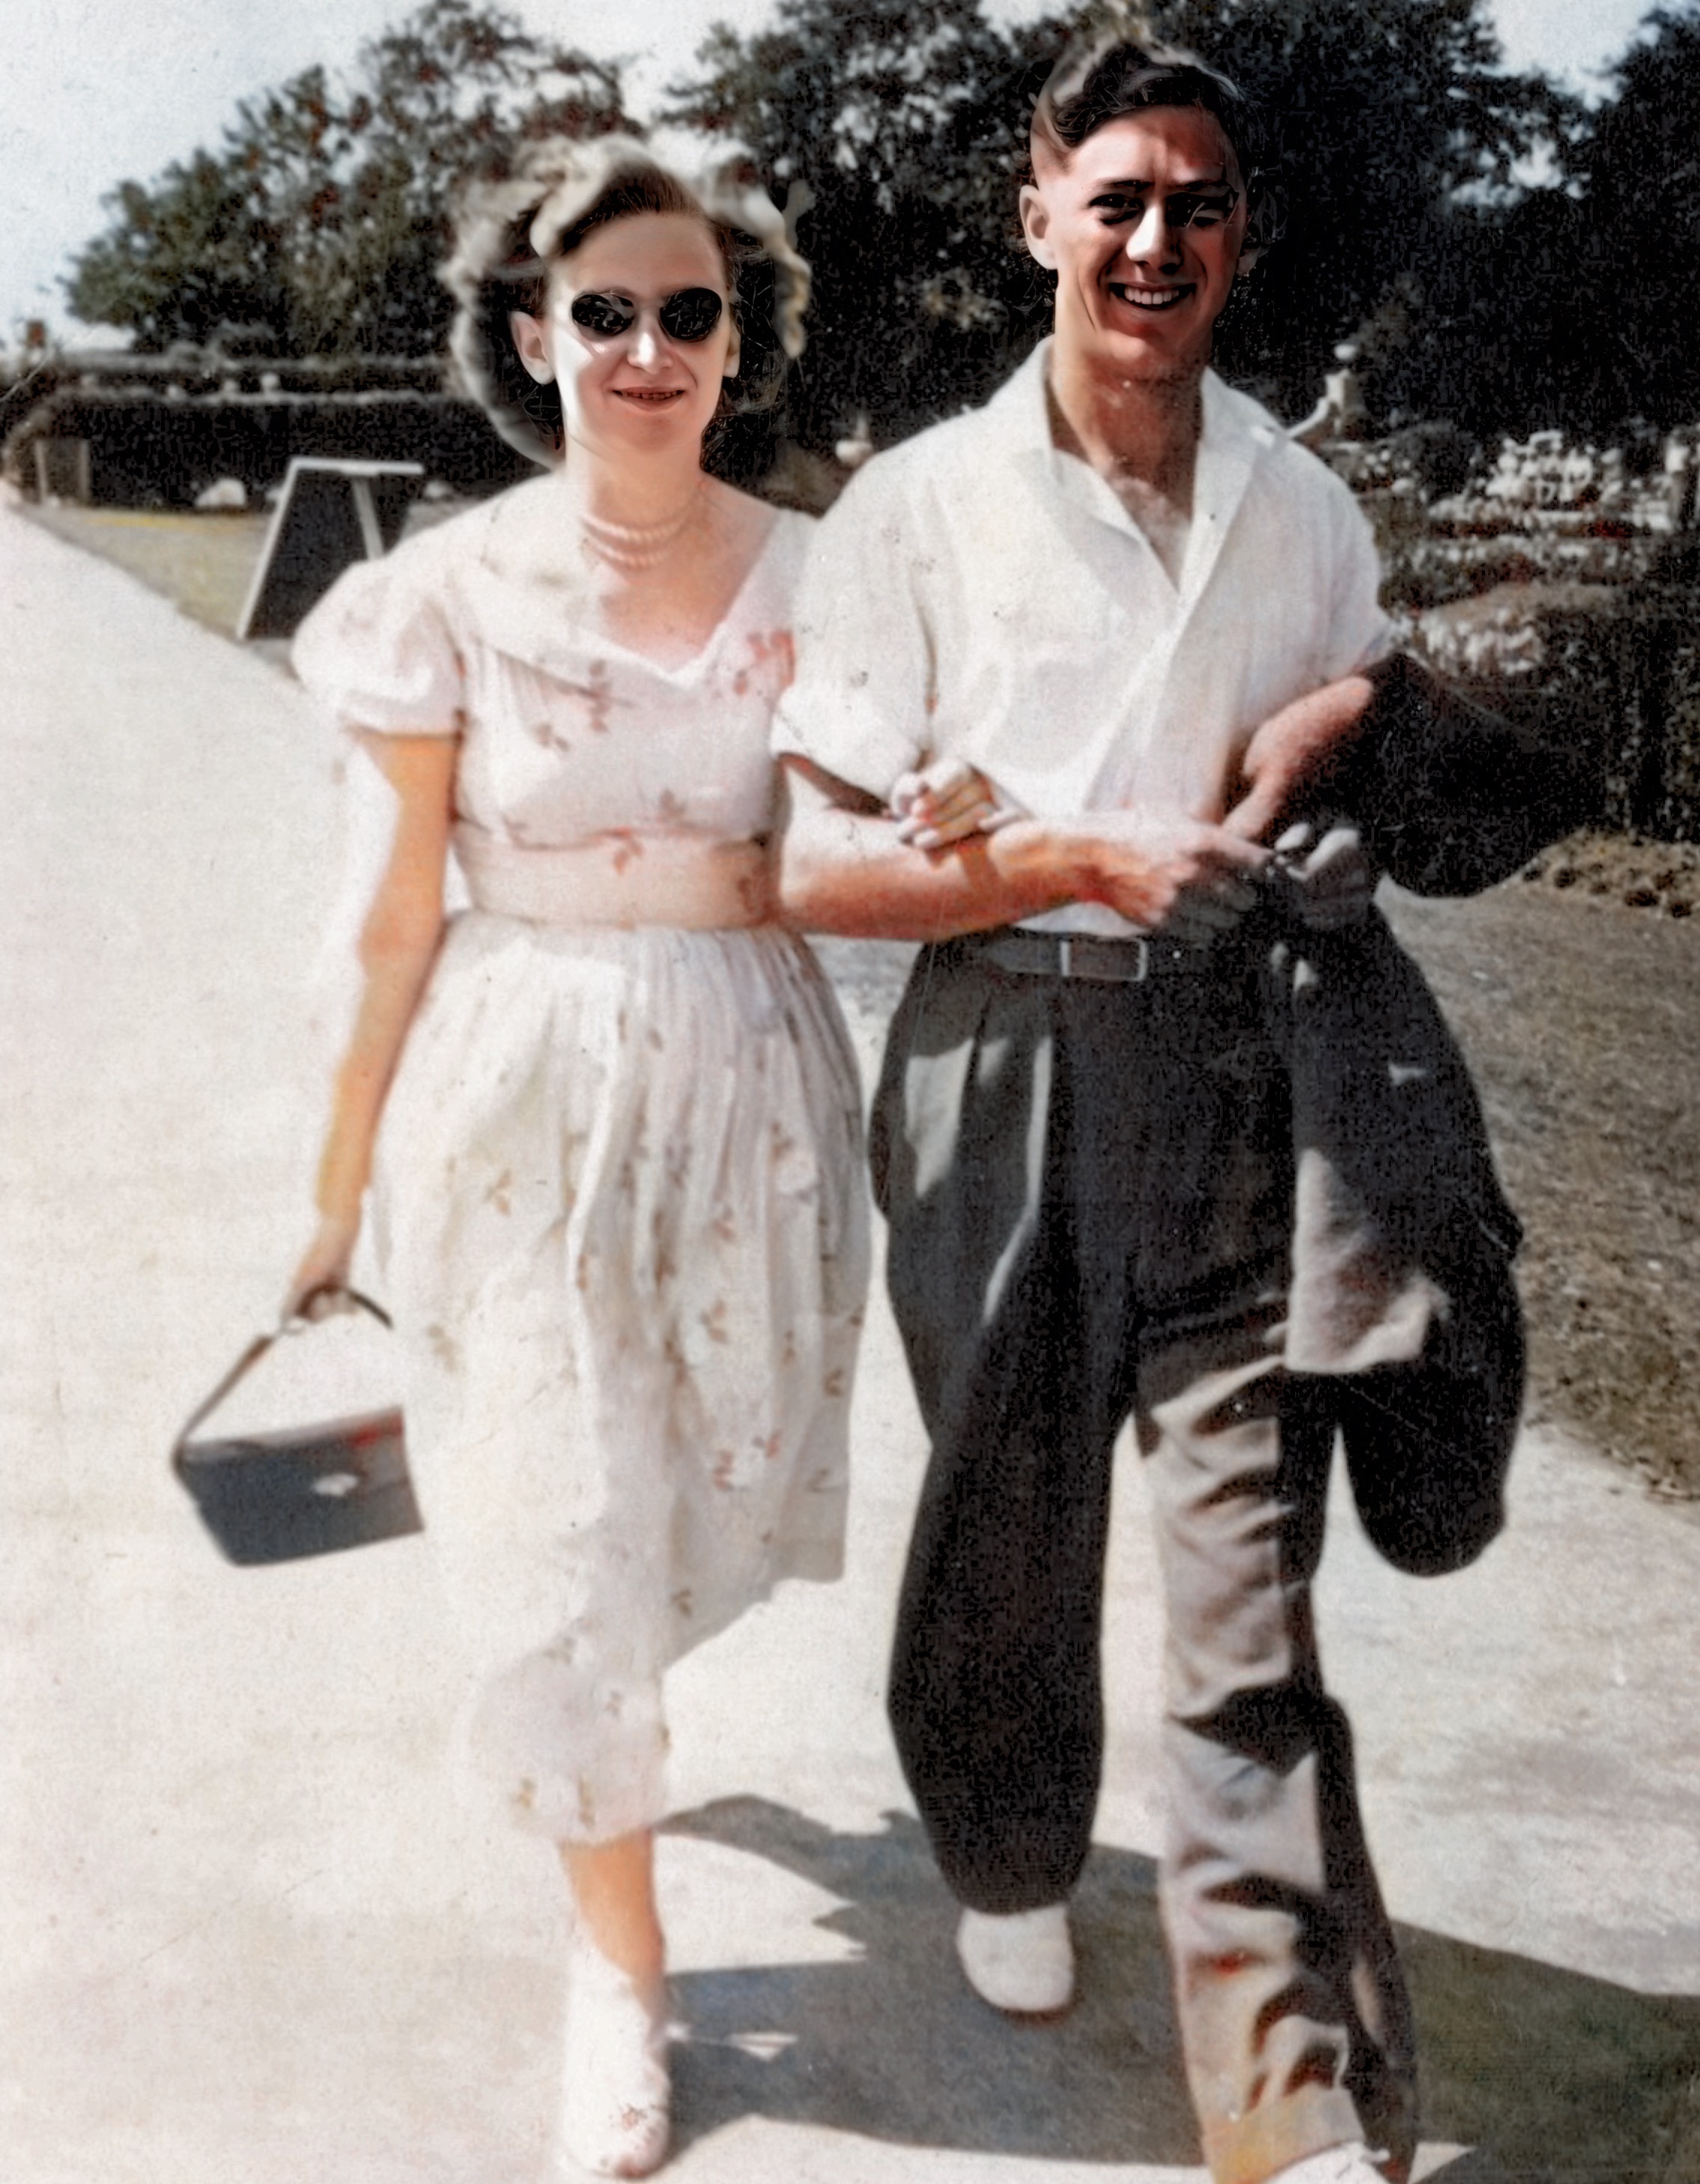 Colourised & faces sharpened from a b/w version. My mother & father in laws on their honeymoon in 1956 in the UK.  